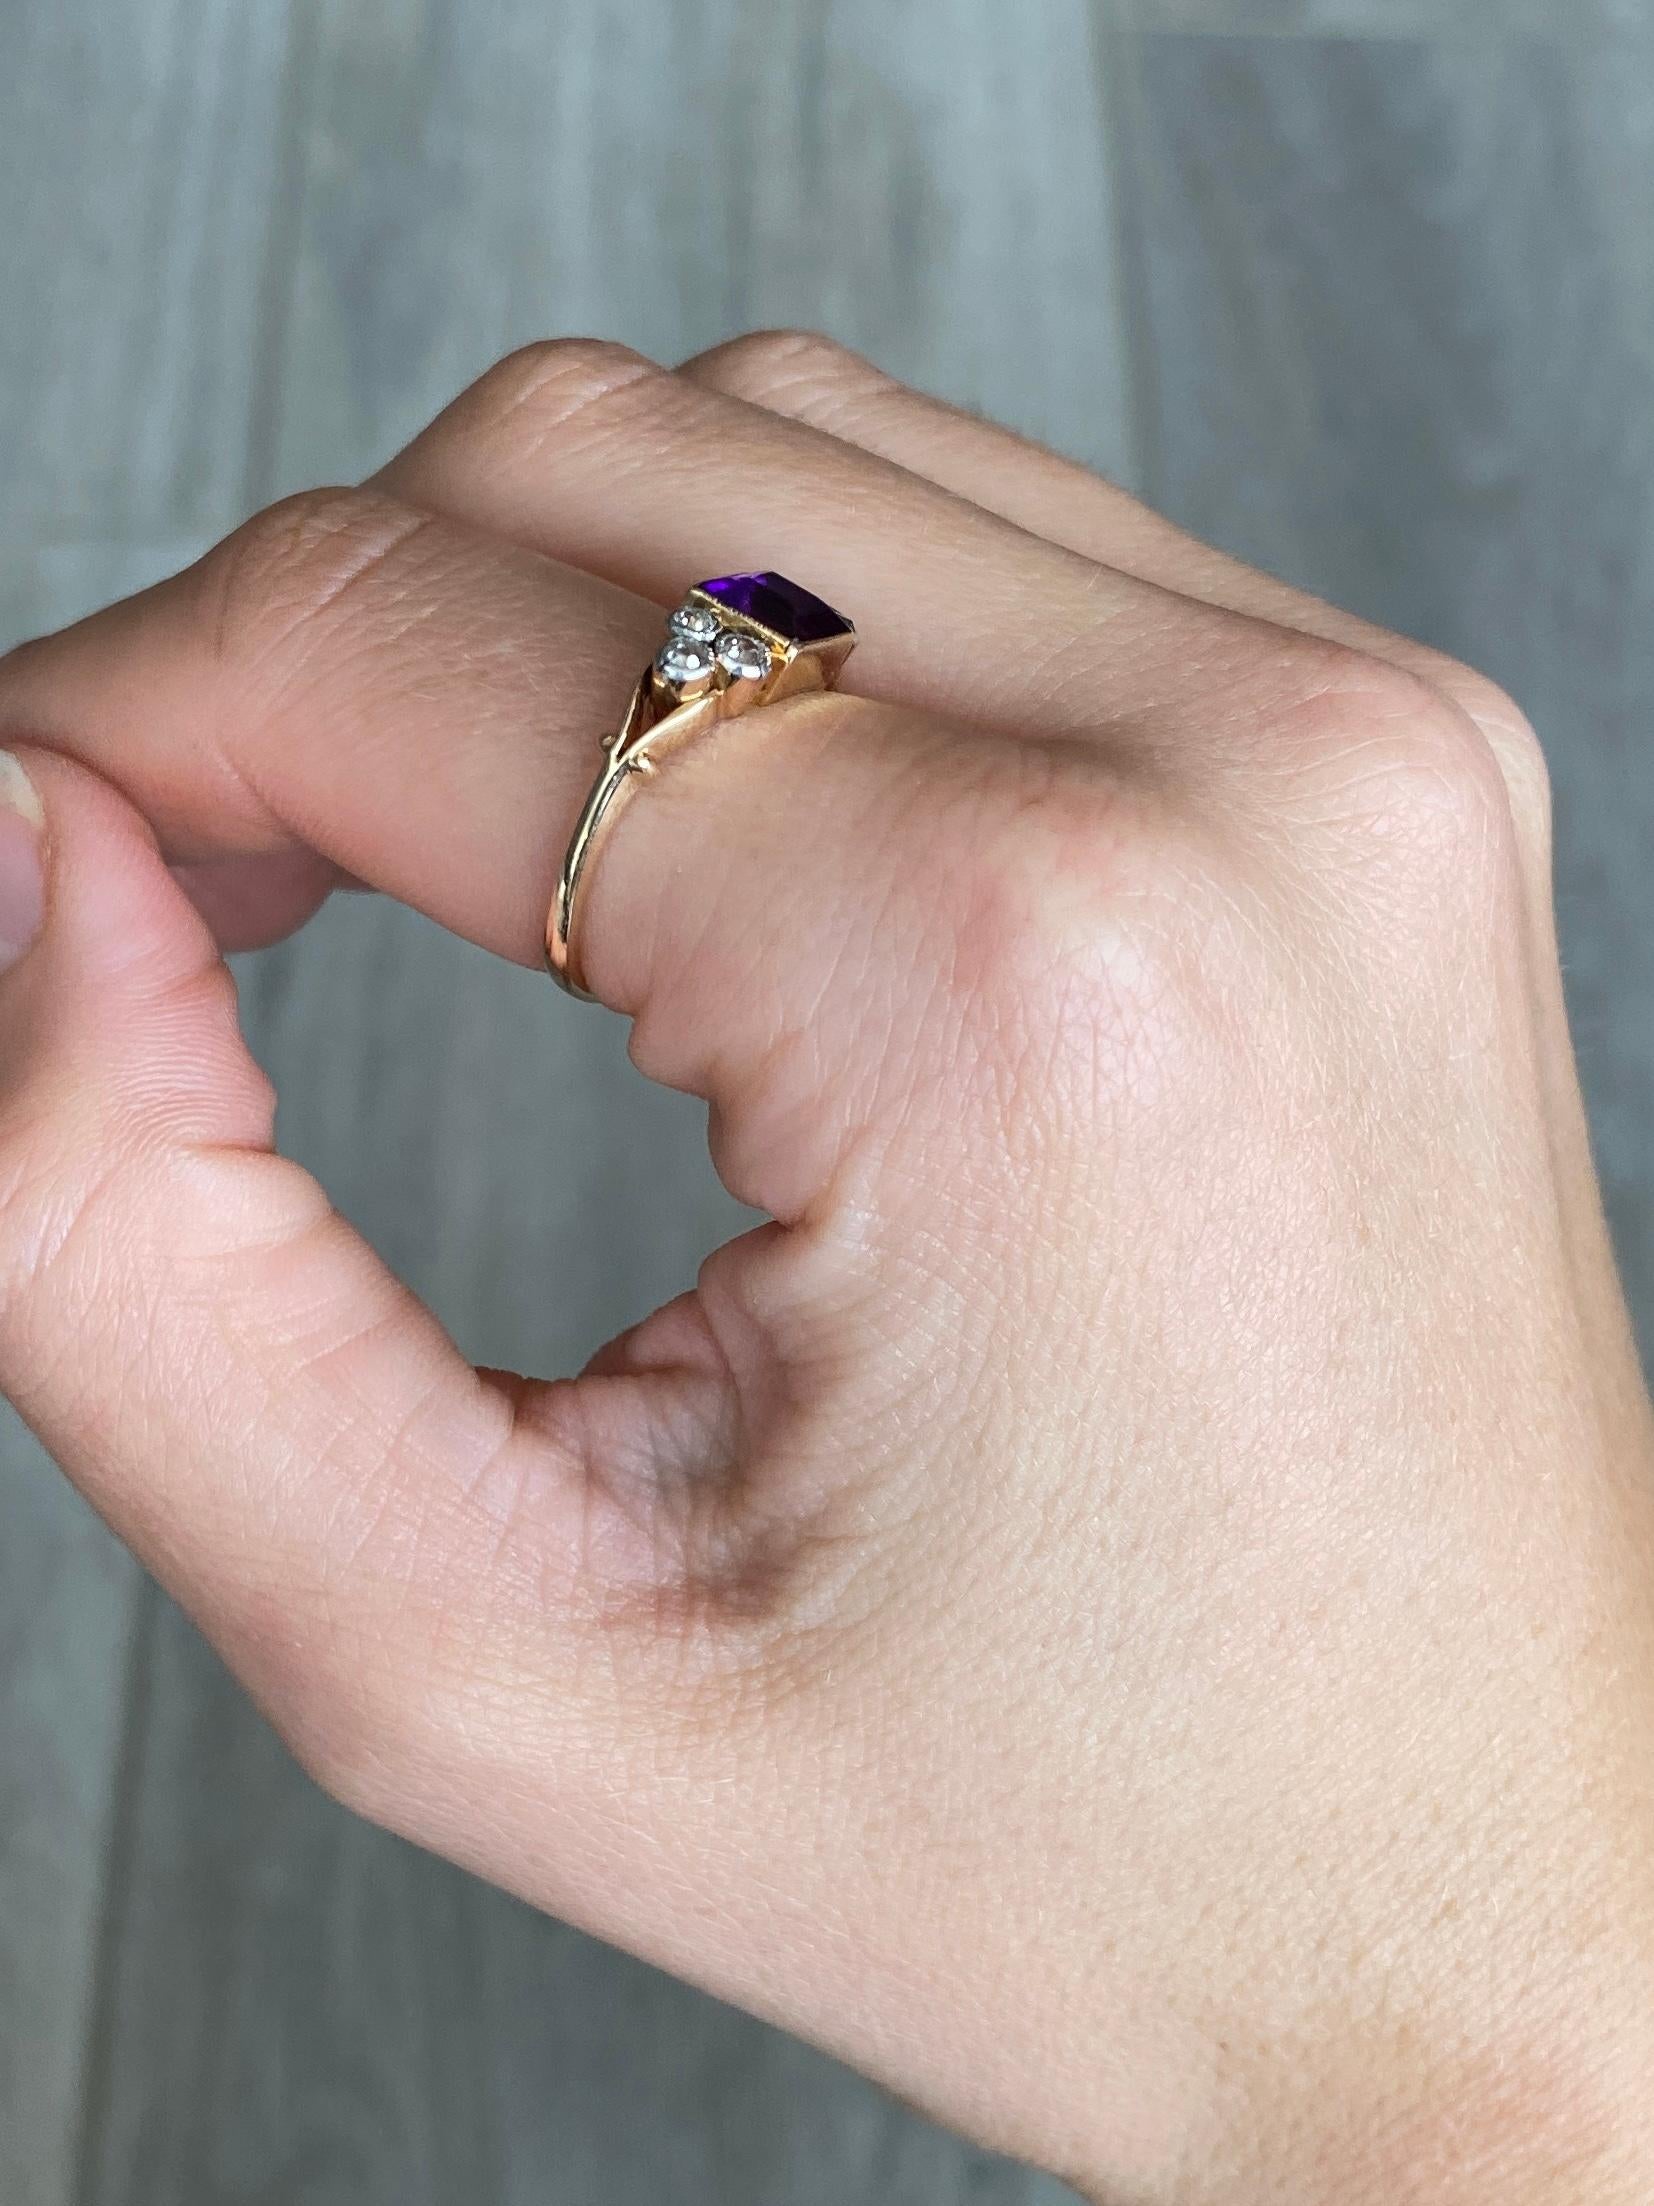 The amethyst stone in this ring is bright and a gorgeous colour. There are two trios of diamonds that sit either side of the central stone. Diamond total 30pts. Modelled in 18carat gold. Amethyst dimensions 6.5x6.5mm.

Ring Size: O 1/2 or 7 1/2